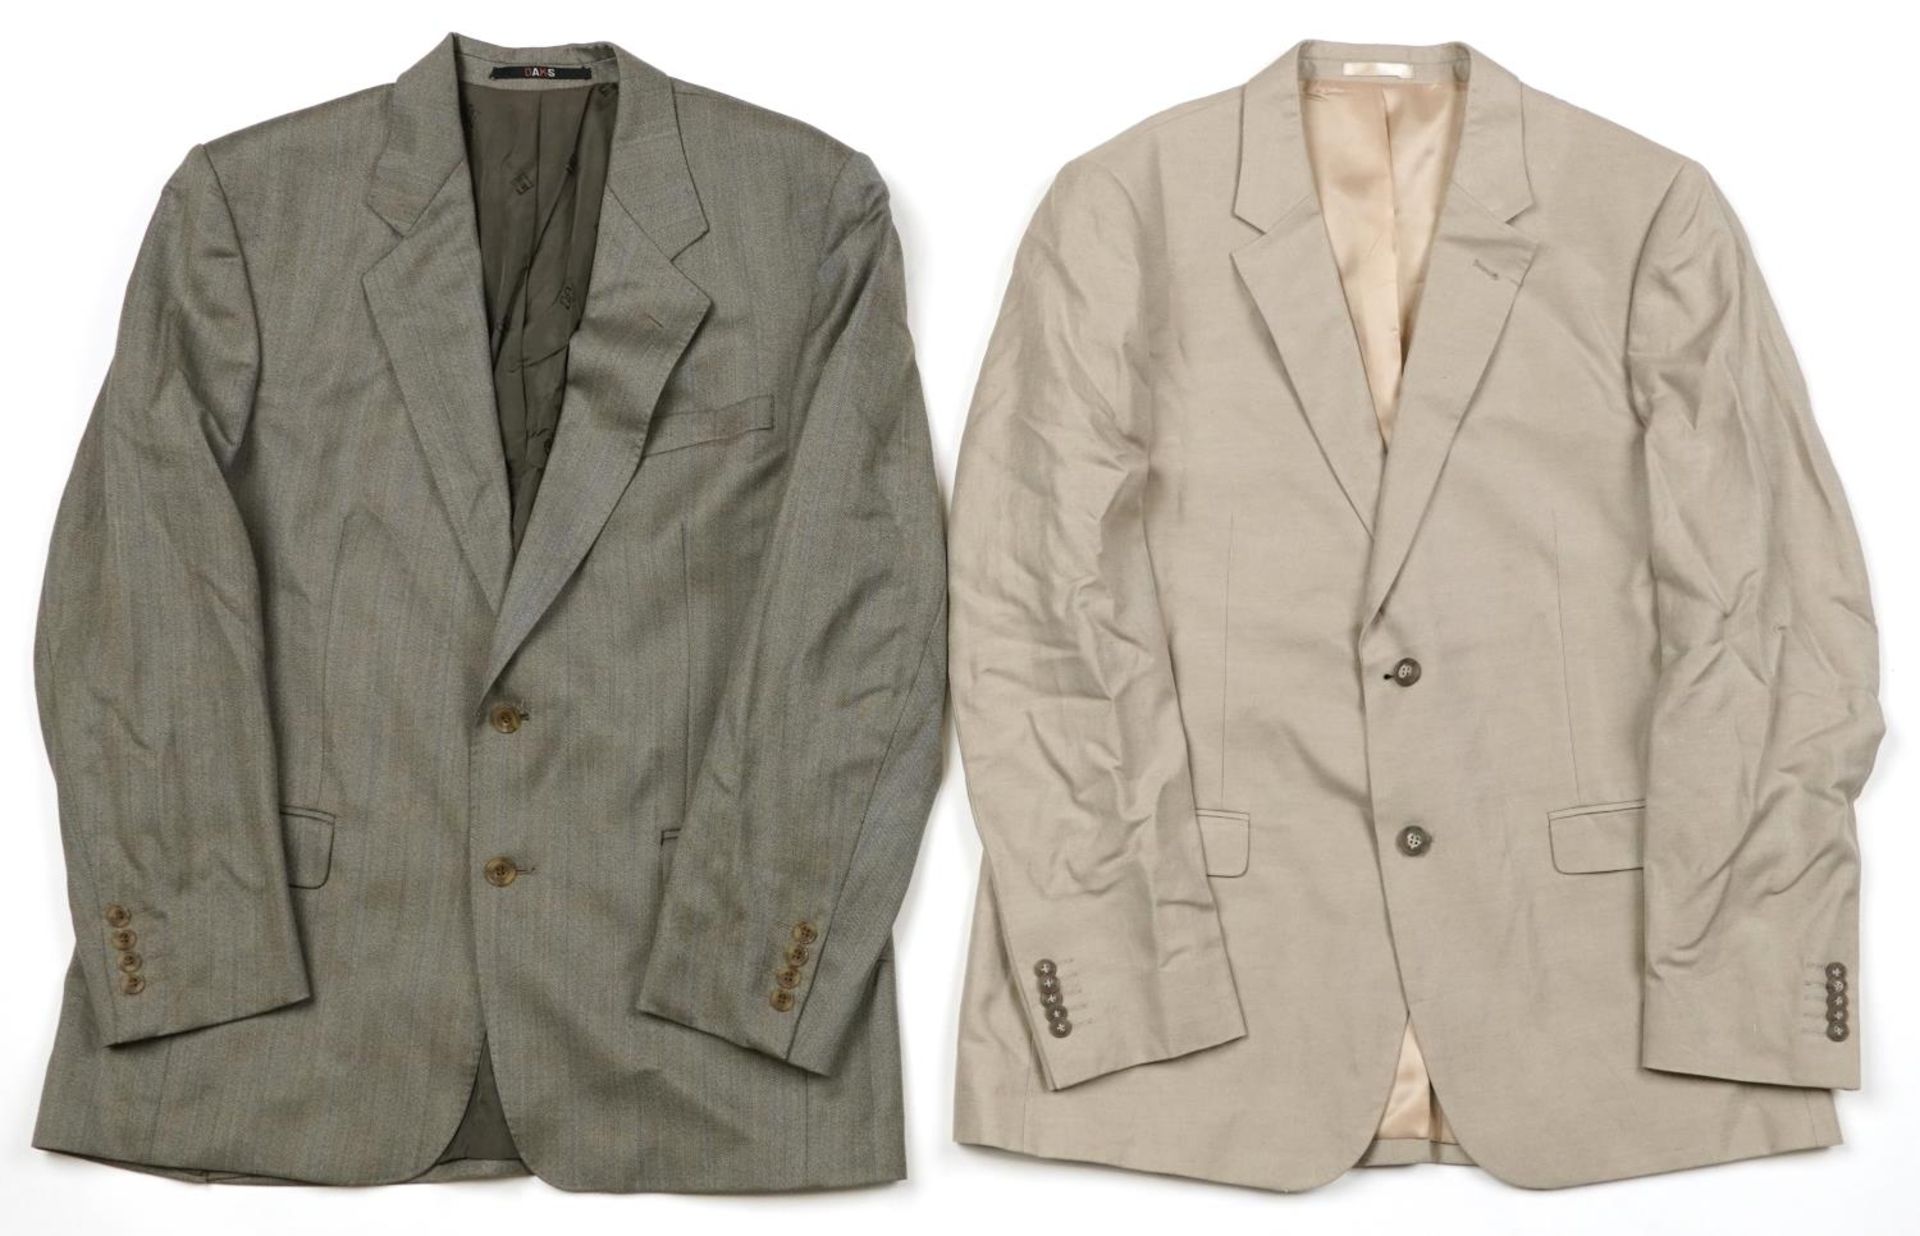 Daks London linen blend jacket together with a Butler & Webb example, size L : For further